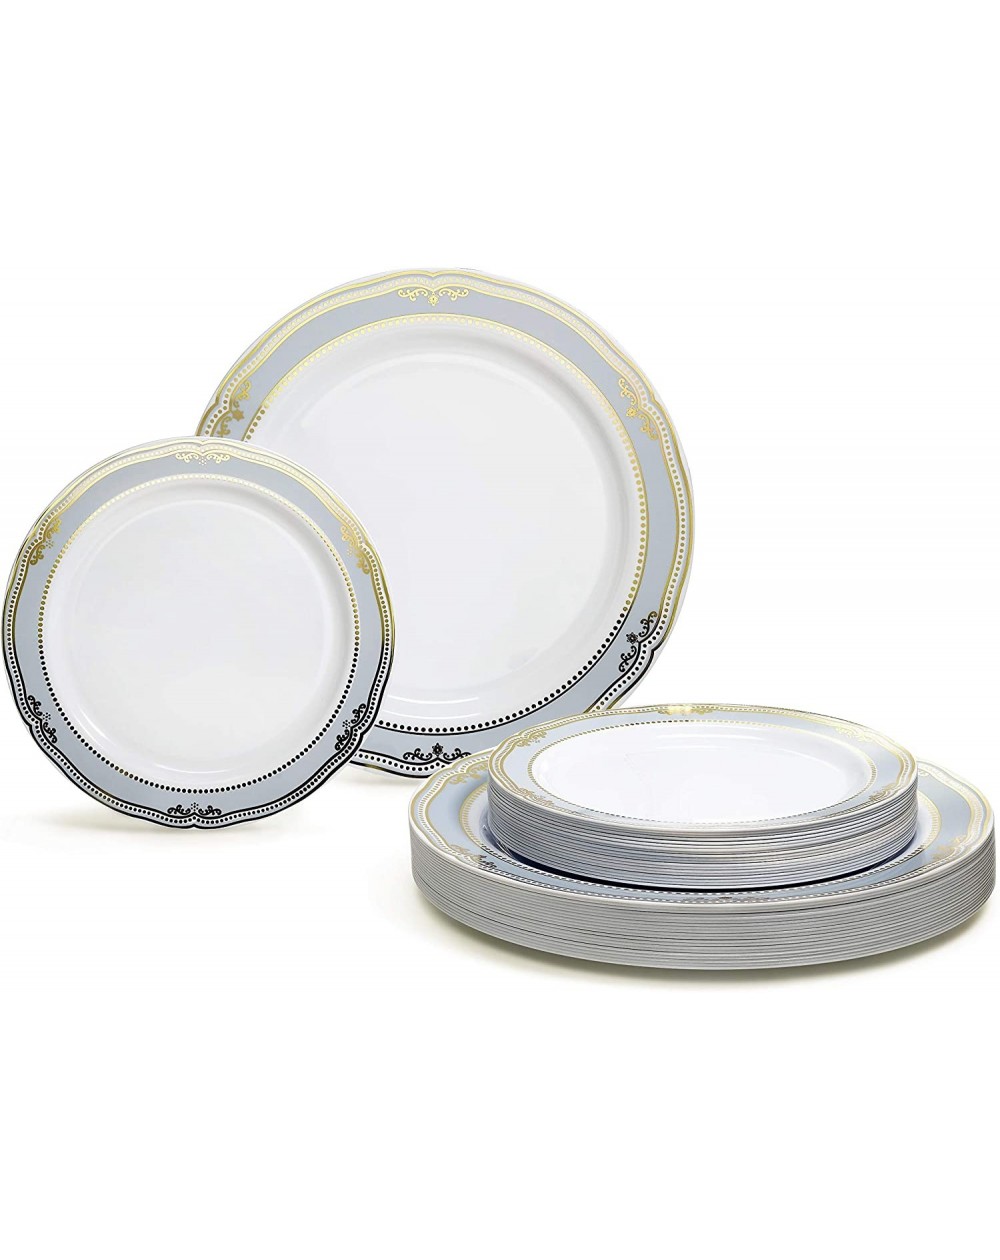 Tableware 50 Plates Pack (25 Guests)-Wedding Party Disposable Plastic Plate Set -25 x 10.25" Dinner + 25 x 7.5" Salad & Desse...